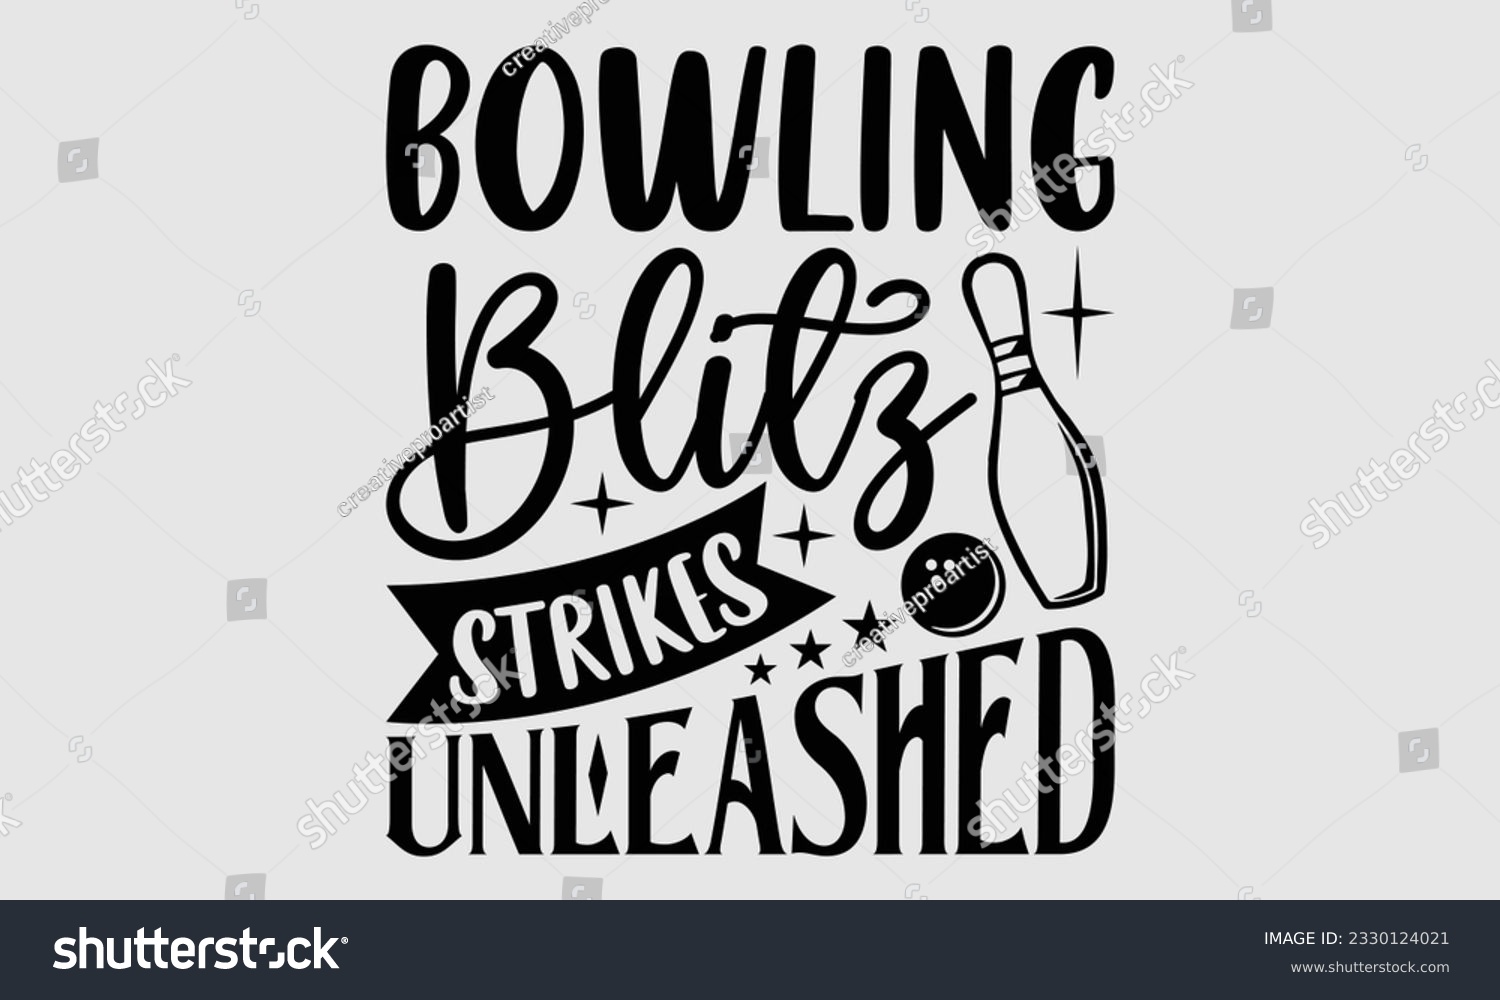 SVG of Bowling Blitz Strikes Unleashed- Bowling t-shirt design, Illustration for prints on SVG and bags, posters, cards, greeting card template with typography text EPS svg